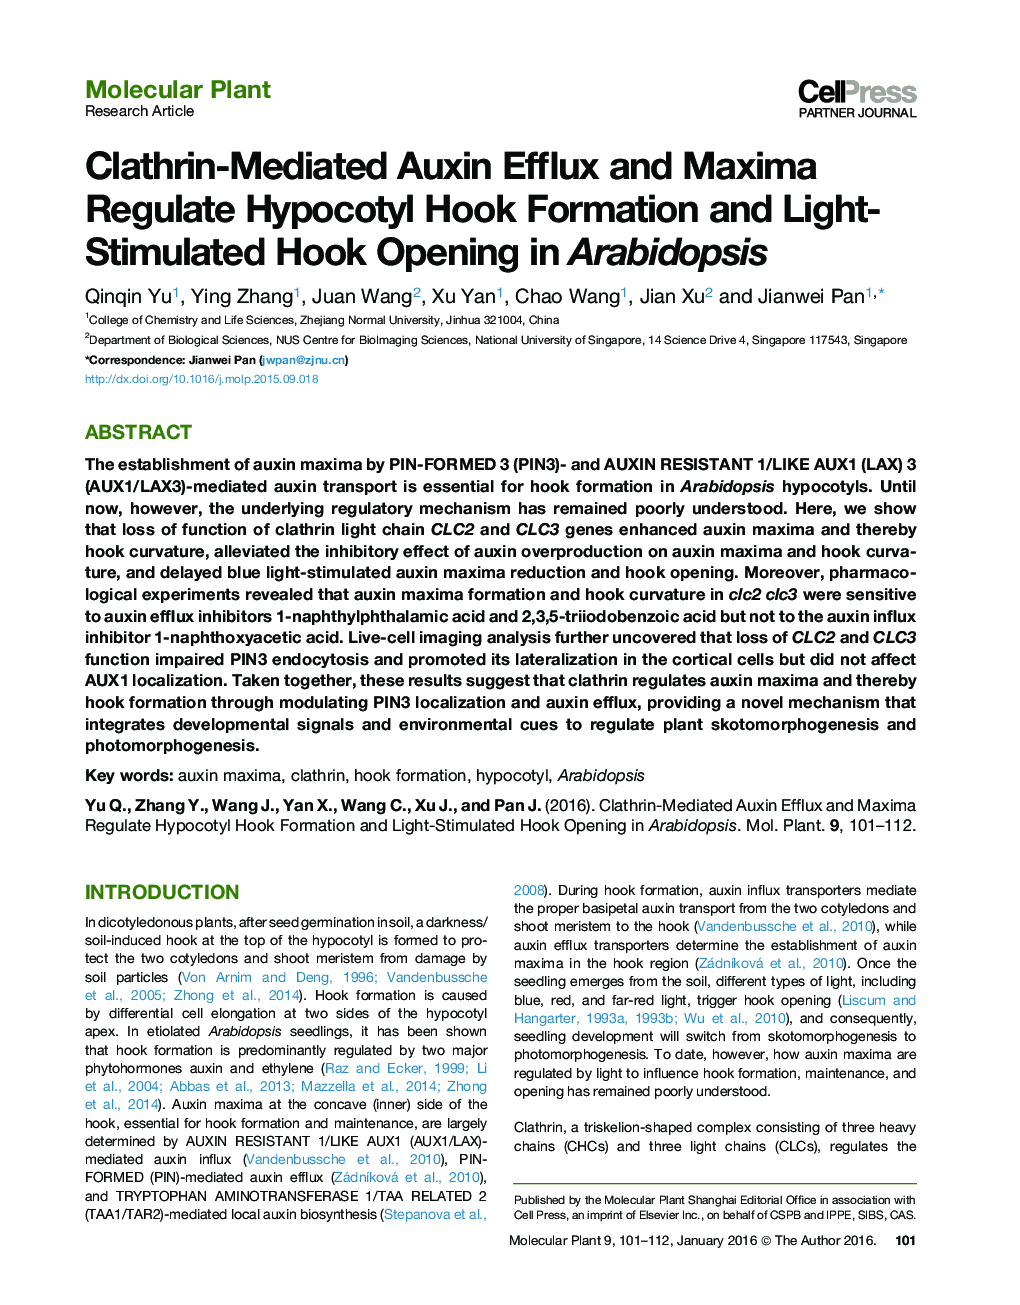 Clathrin-Mediated Auxin Efflux and Maxima Regulate Hypocotyl Hook Formation and Light-Stimulated Hook Opening in Arabidopsis 